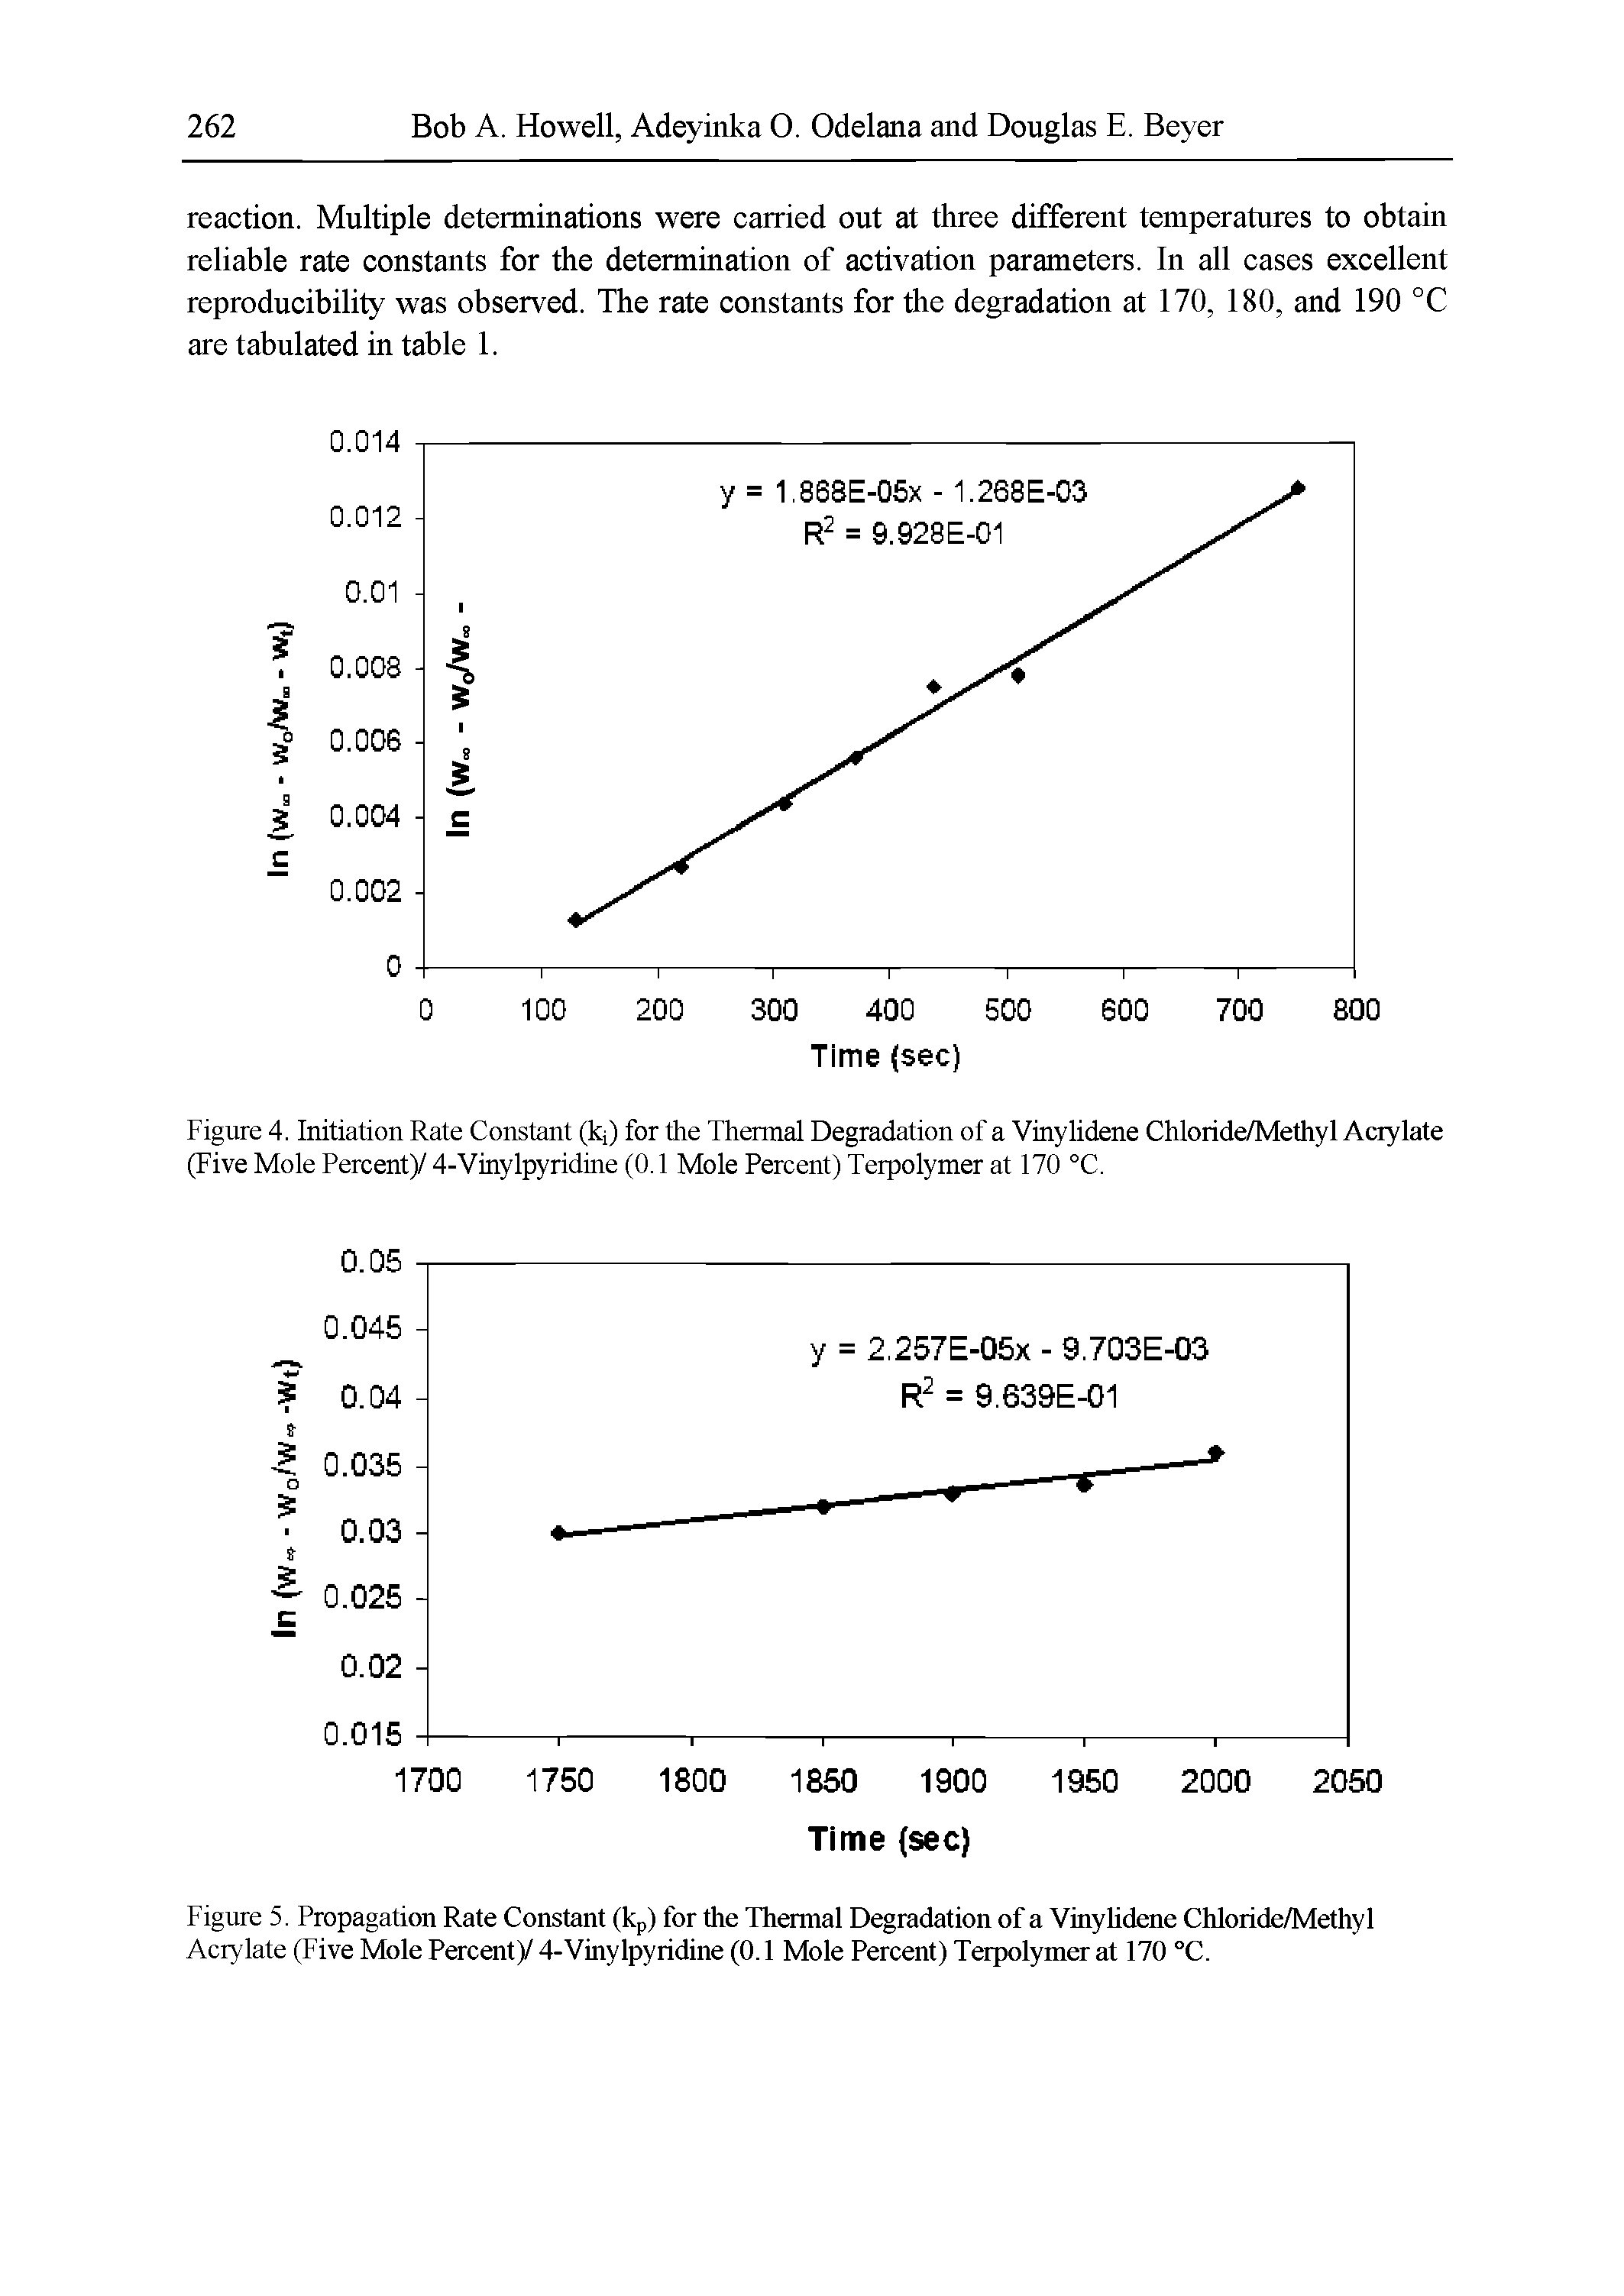 Figure 5. Propagation Rate Constant (kp) for the Thermal Degradation of a Vinylidene Chloride/Methyl Acrylate (Five Mole Percent)/ 4-Vinylpyridine (0.1 Mole Percent) Terpolymer at 170 °C.